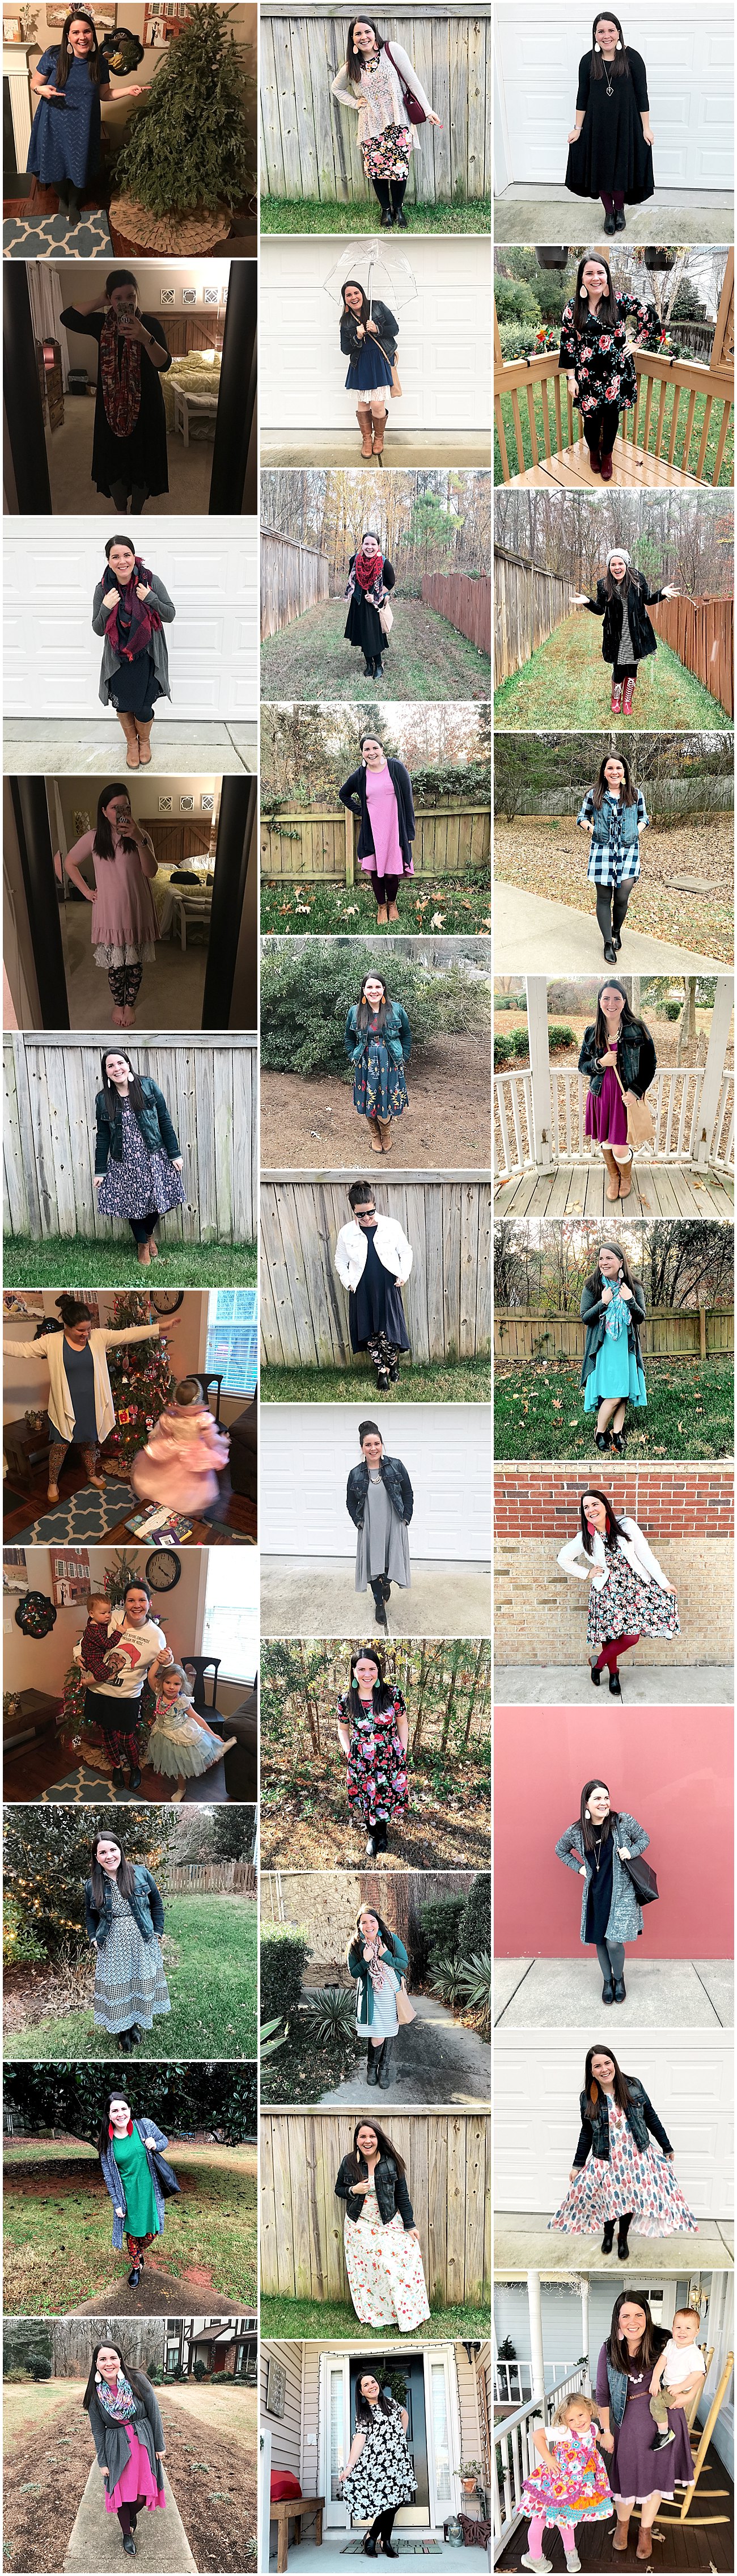 Dressember: 31 Days of Dresses to Fight Human Trafficking | RECAP (7) by popular North Carolina ethical fashion blogger Still Being Molly